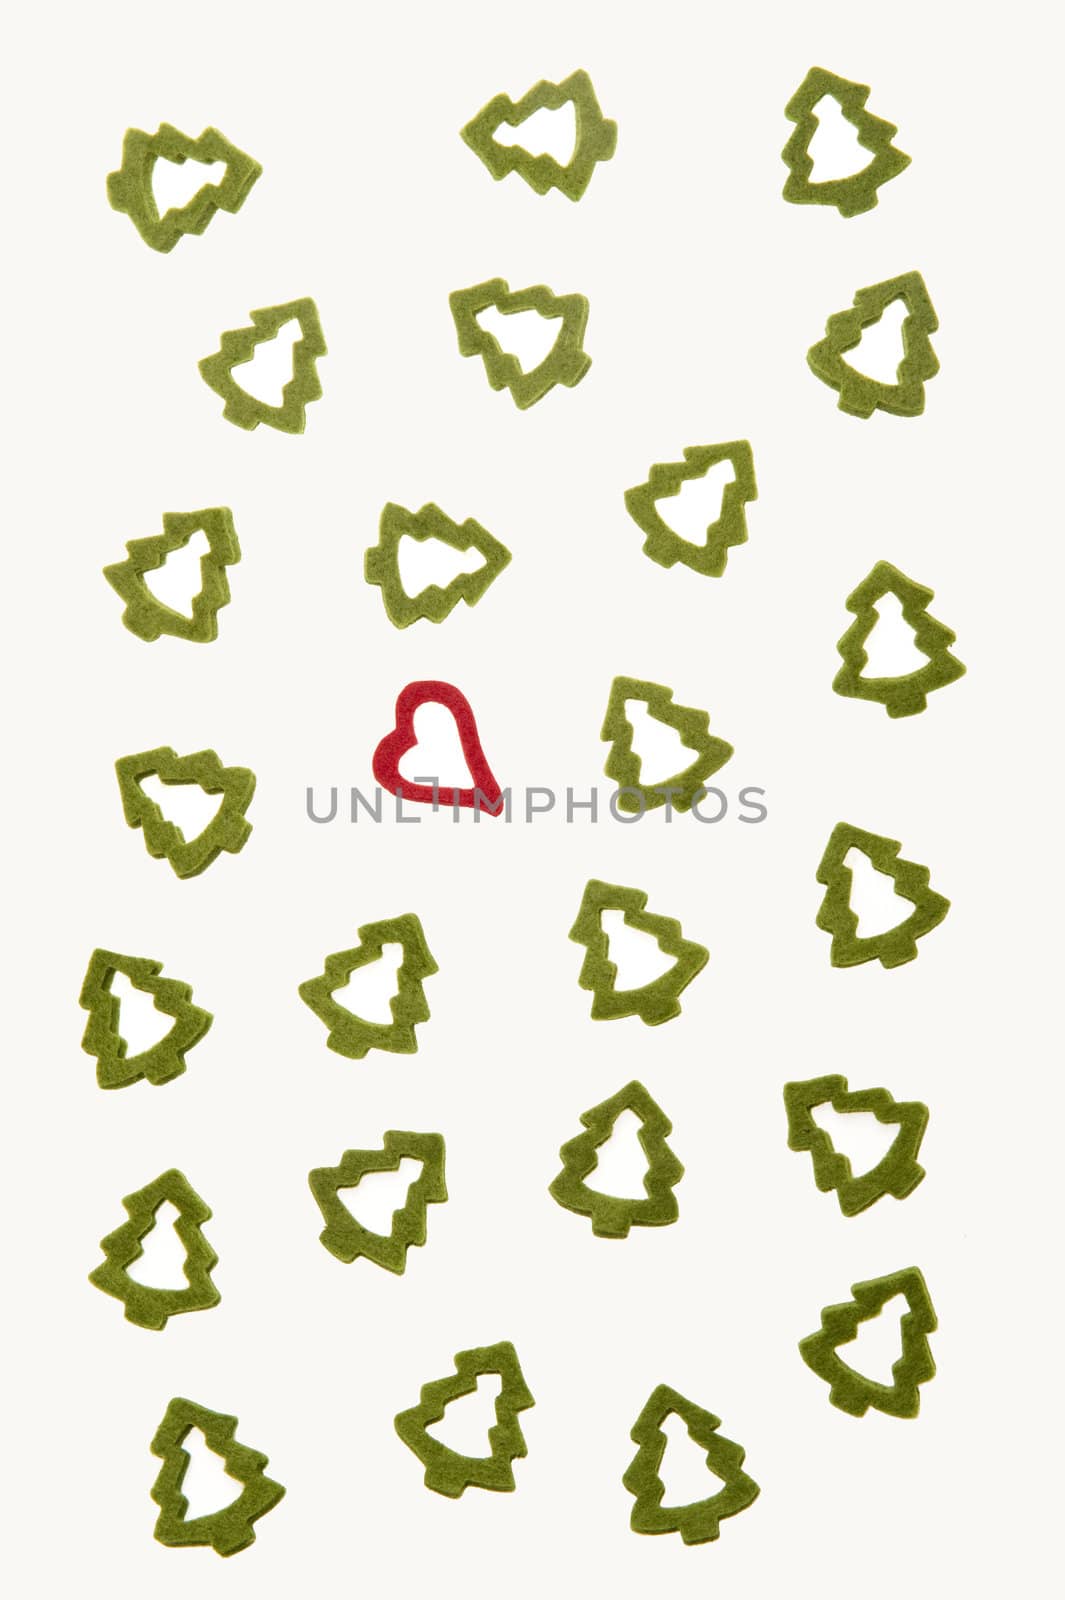 Ornamental heart between fir-trees on white background representing Christmas.